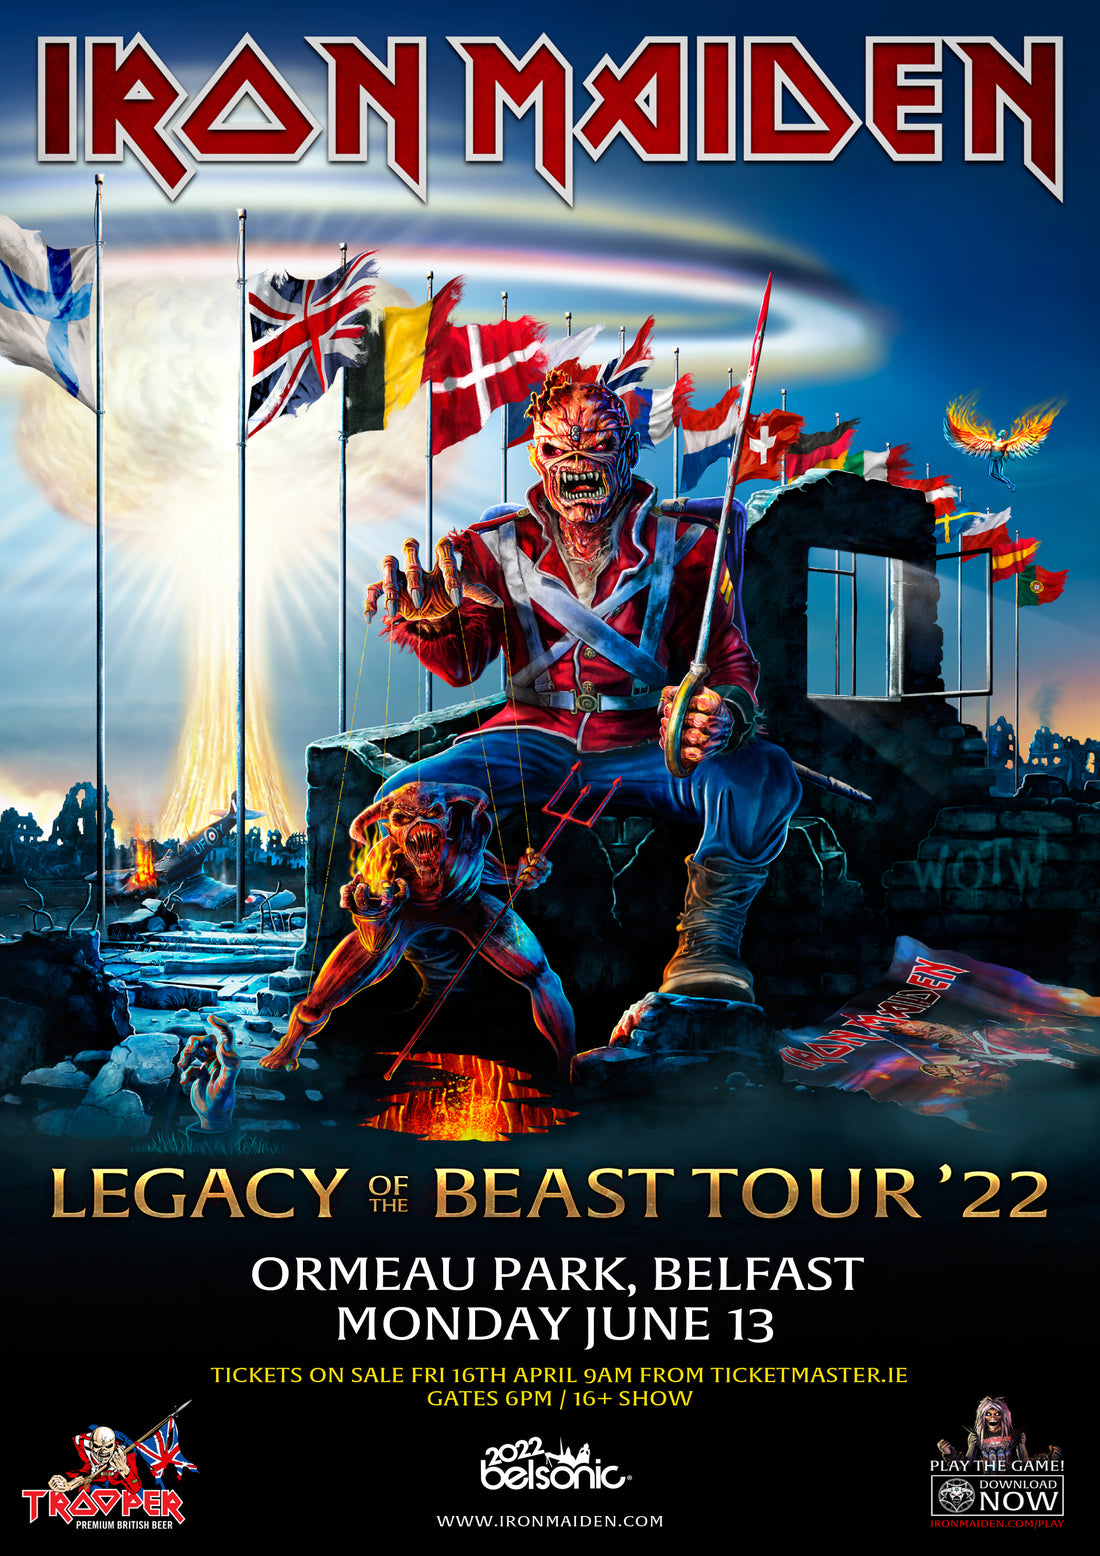 Iron Maiden to play Ormeau Park in 2022 with Belsonic show